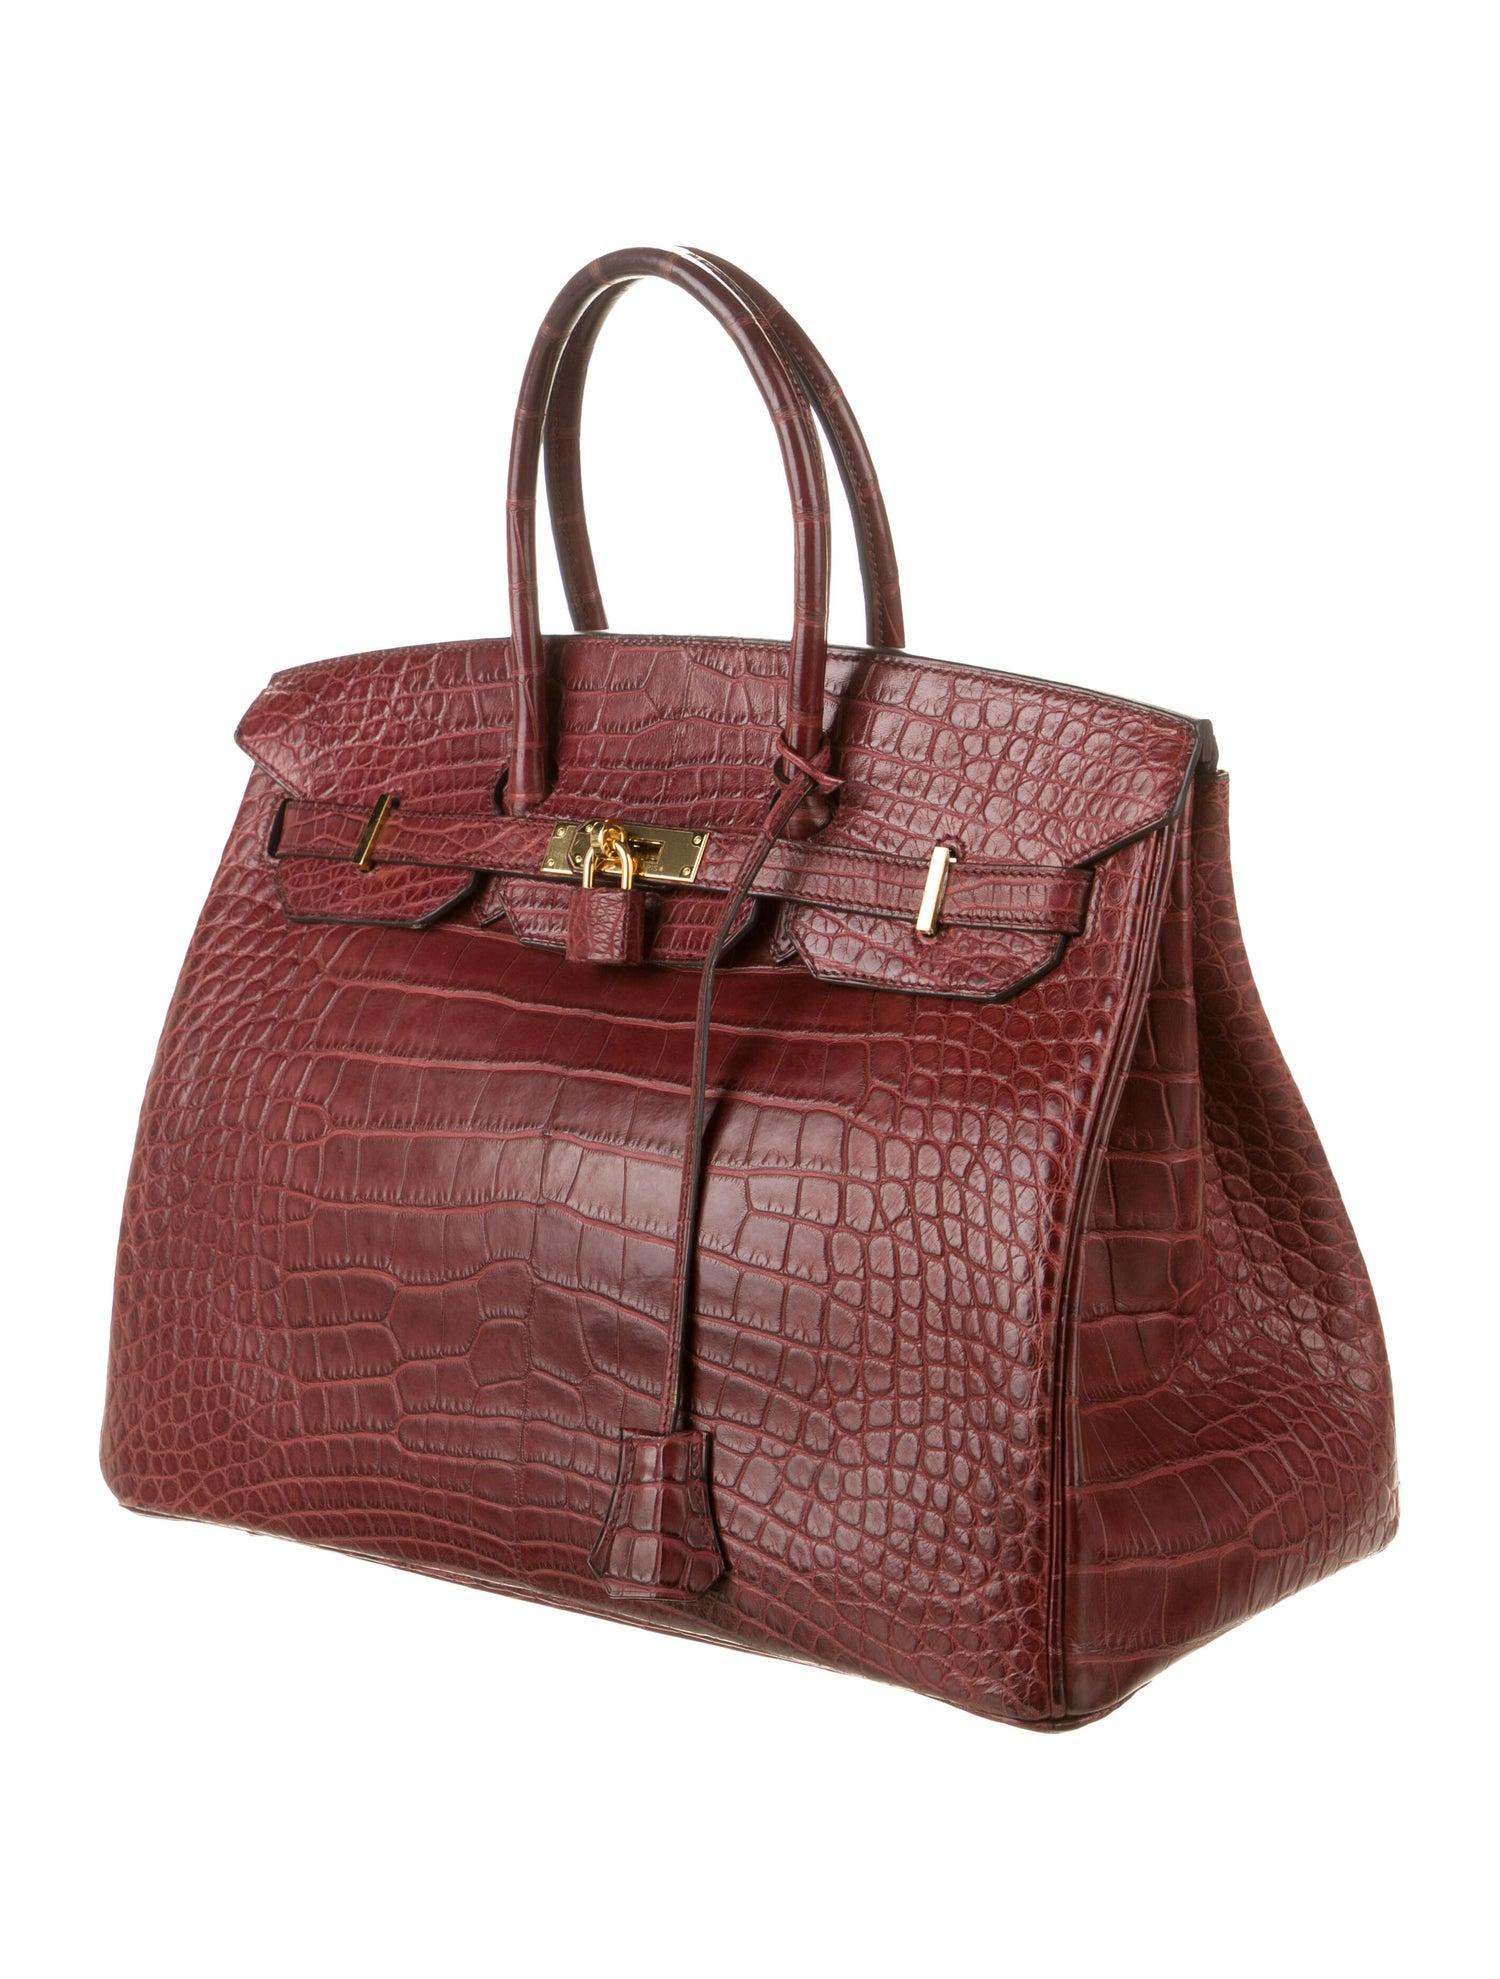 Our Newest Hermes Birkin Has Arrived.   

Featuring matte exotic alligator skin leather, this Hermes Birkin 35 is one of the most coveted Birkin from the French fashion house. Featuring stunning gold hardware, it’s a strikingly beautiful status